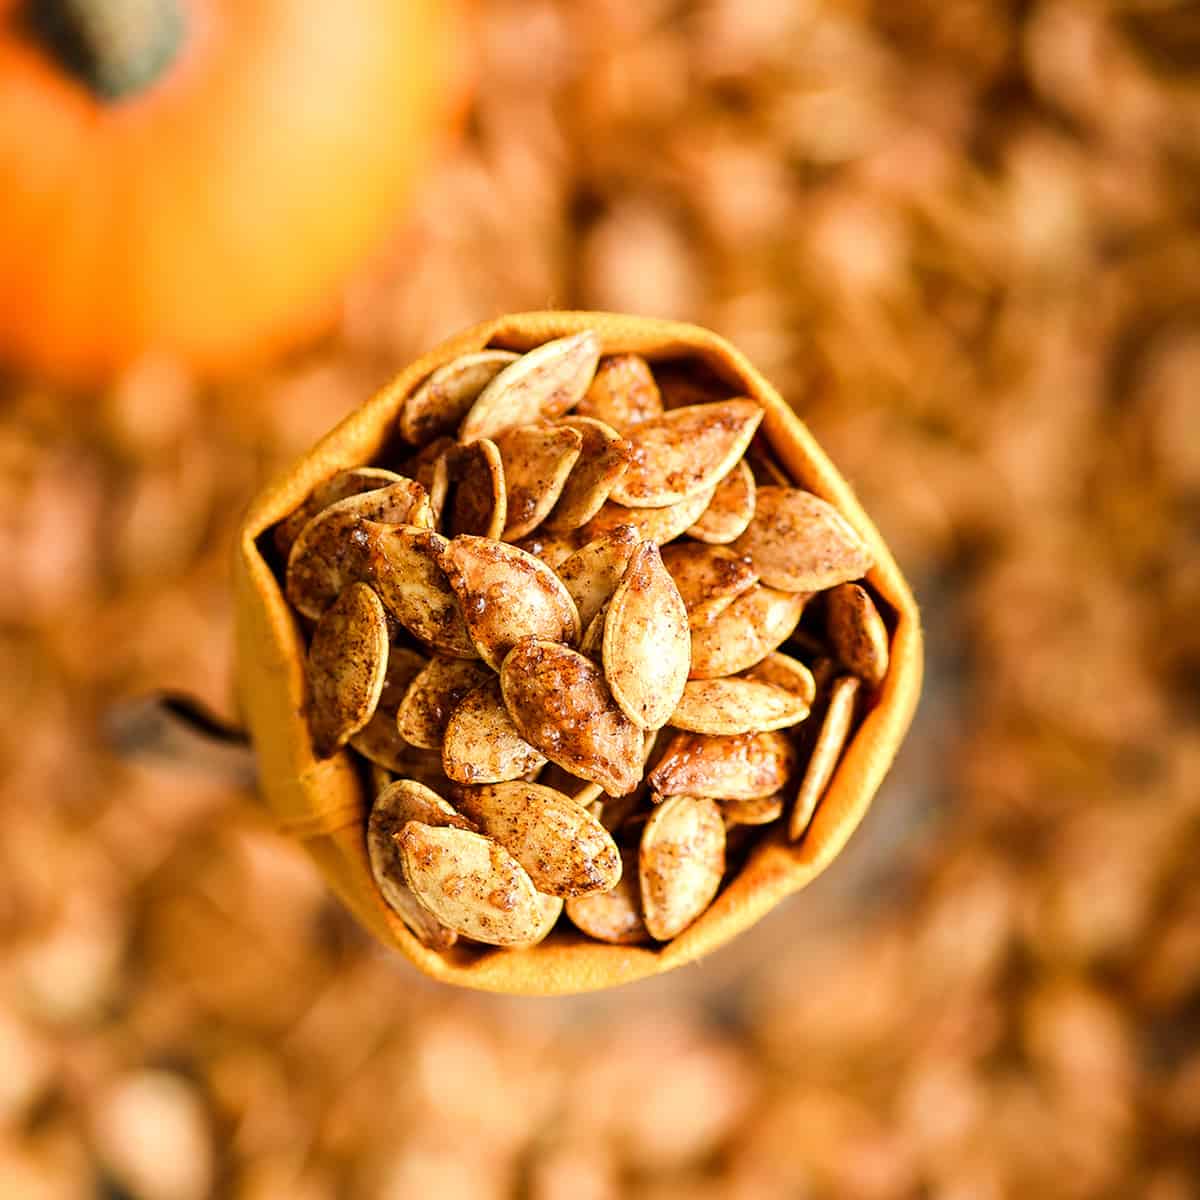 Overhead view of Cinnamon Sugar Pumpkin Seeds in a small bag with more roasted pumpkin seeds in the background